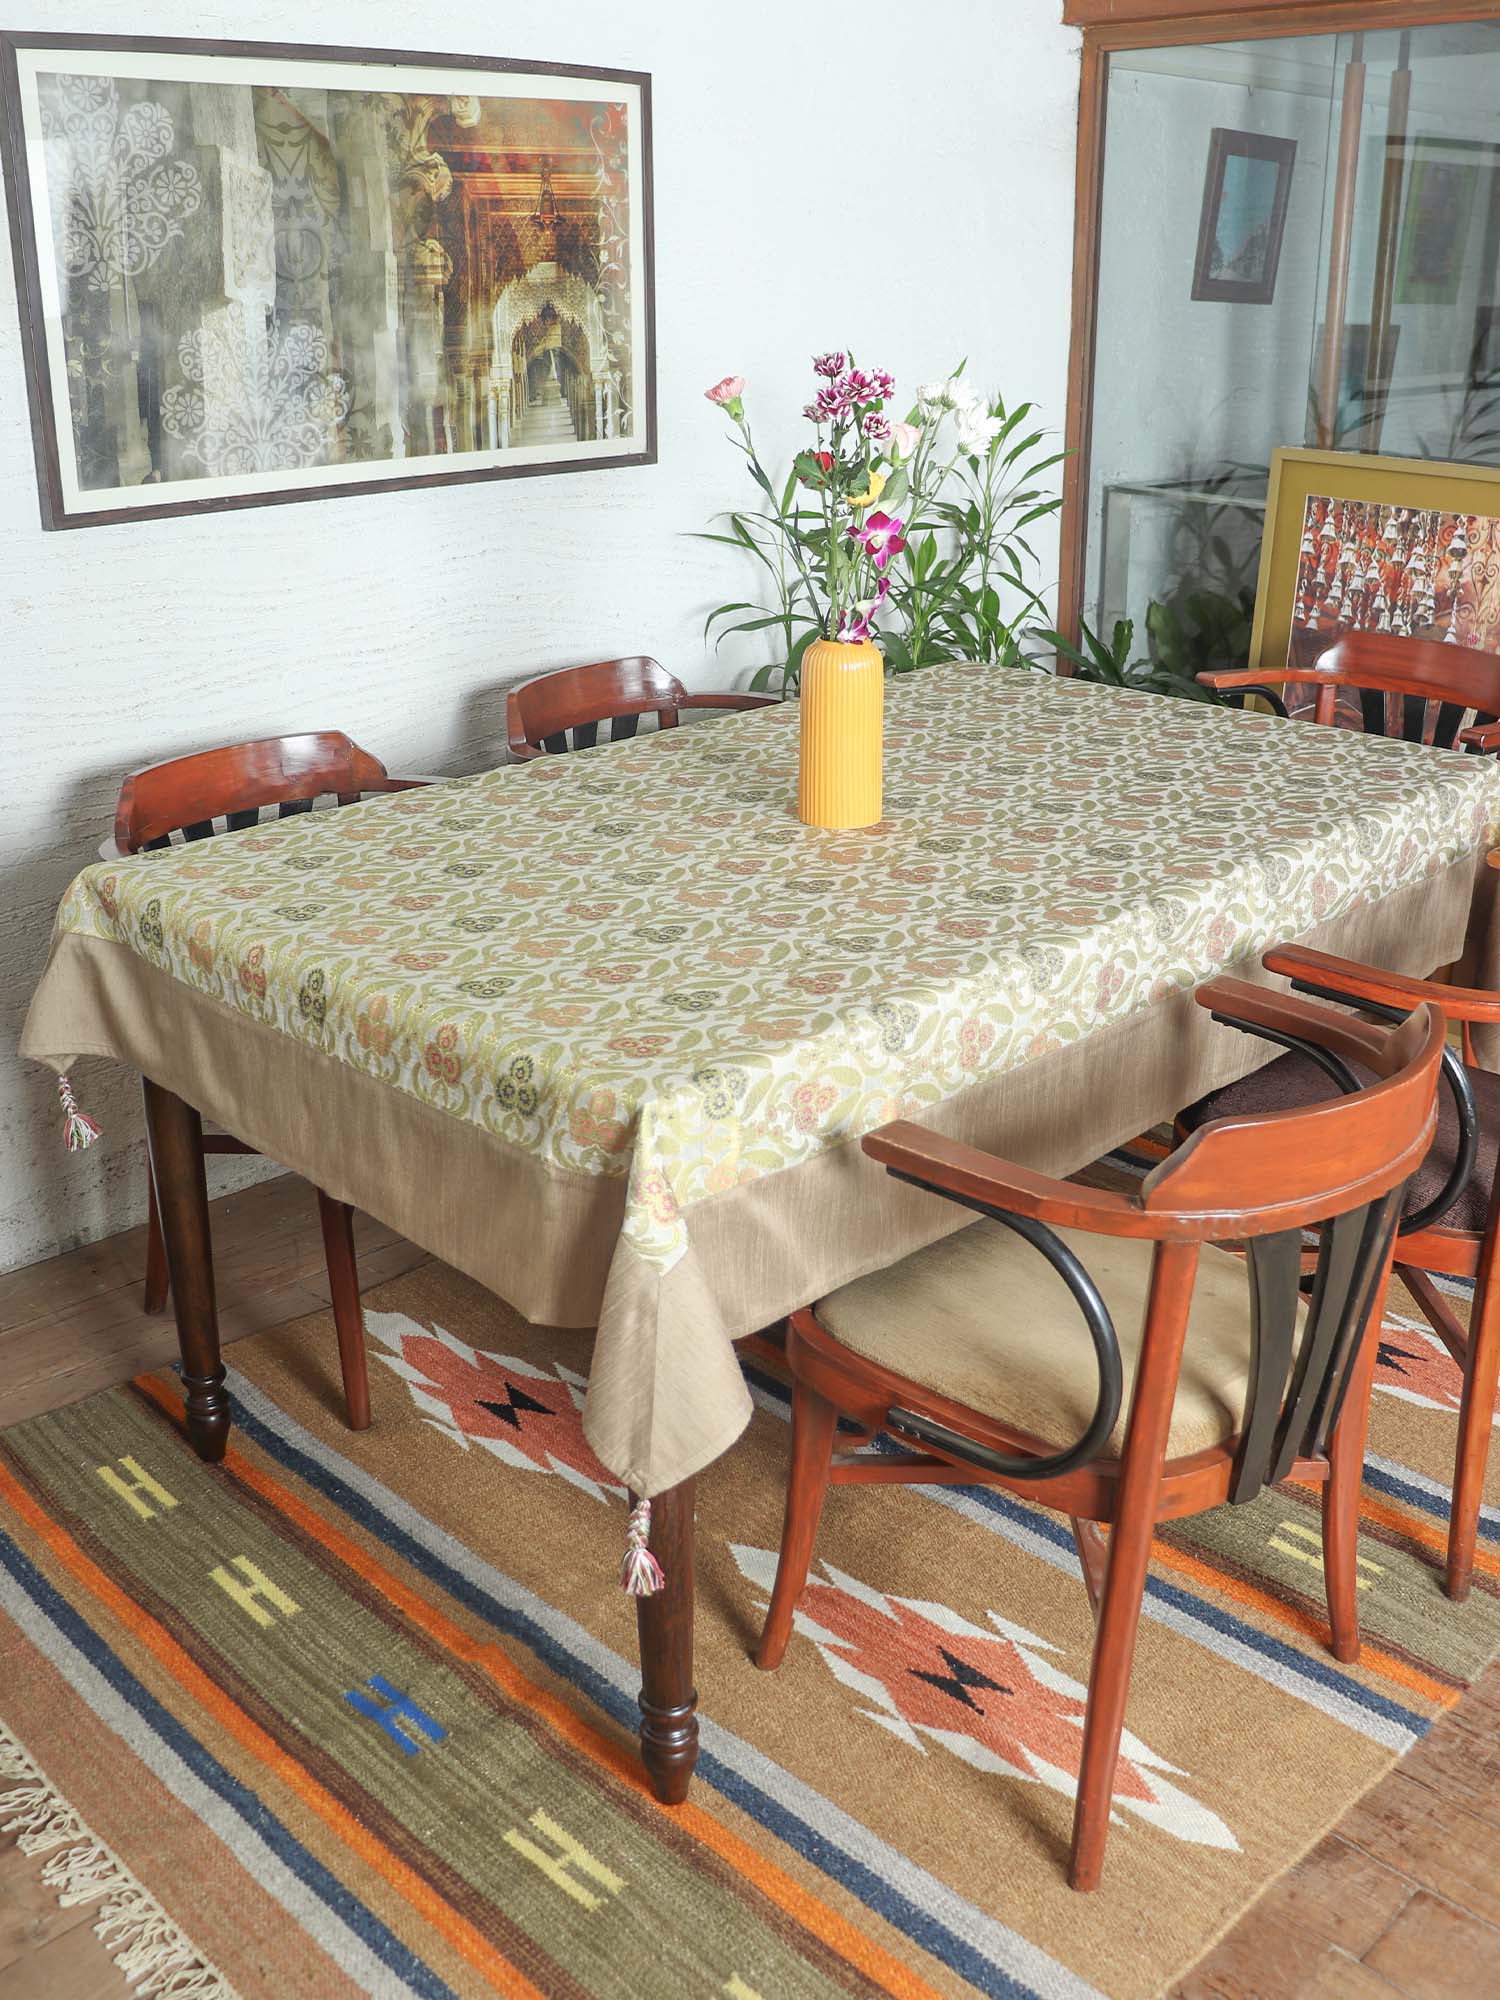 Table Cover Floral with Panel and Hand Braided Tassels| Brocade Silk Golden | Heat Resistant Table Cover for Kitchen Table/Dining Table Cloth, 52 X 84 Inches; 130 cm X 210 cm